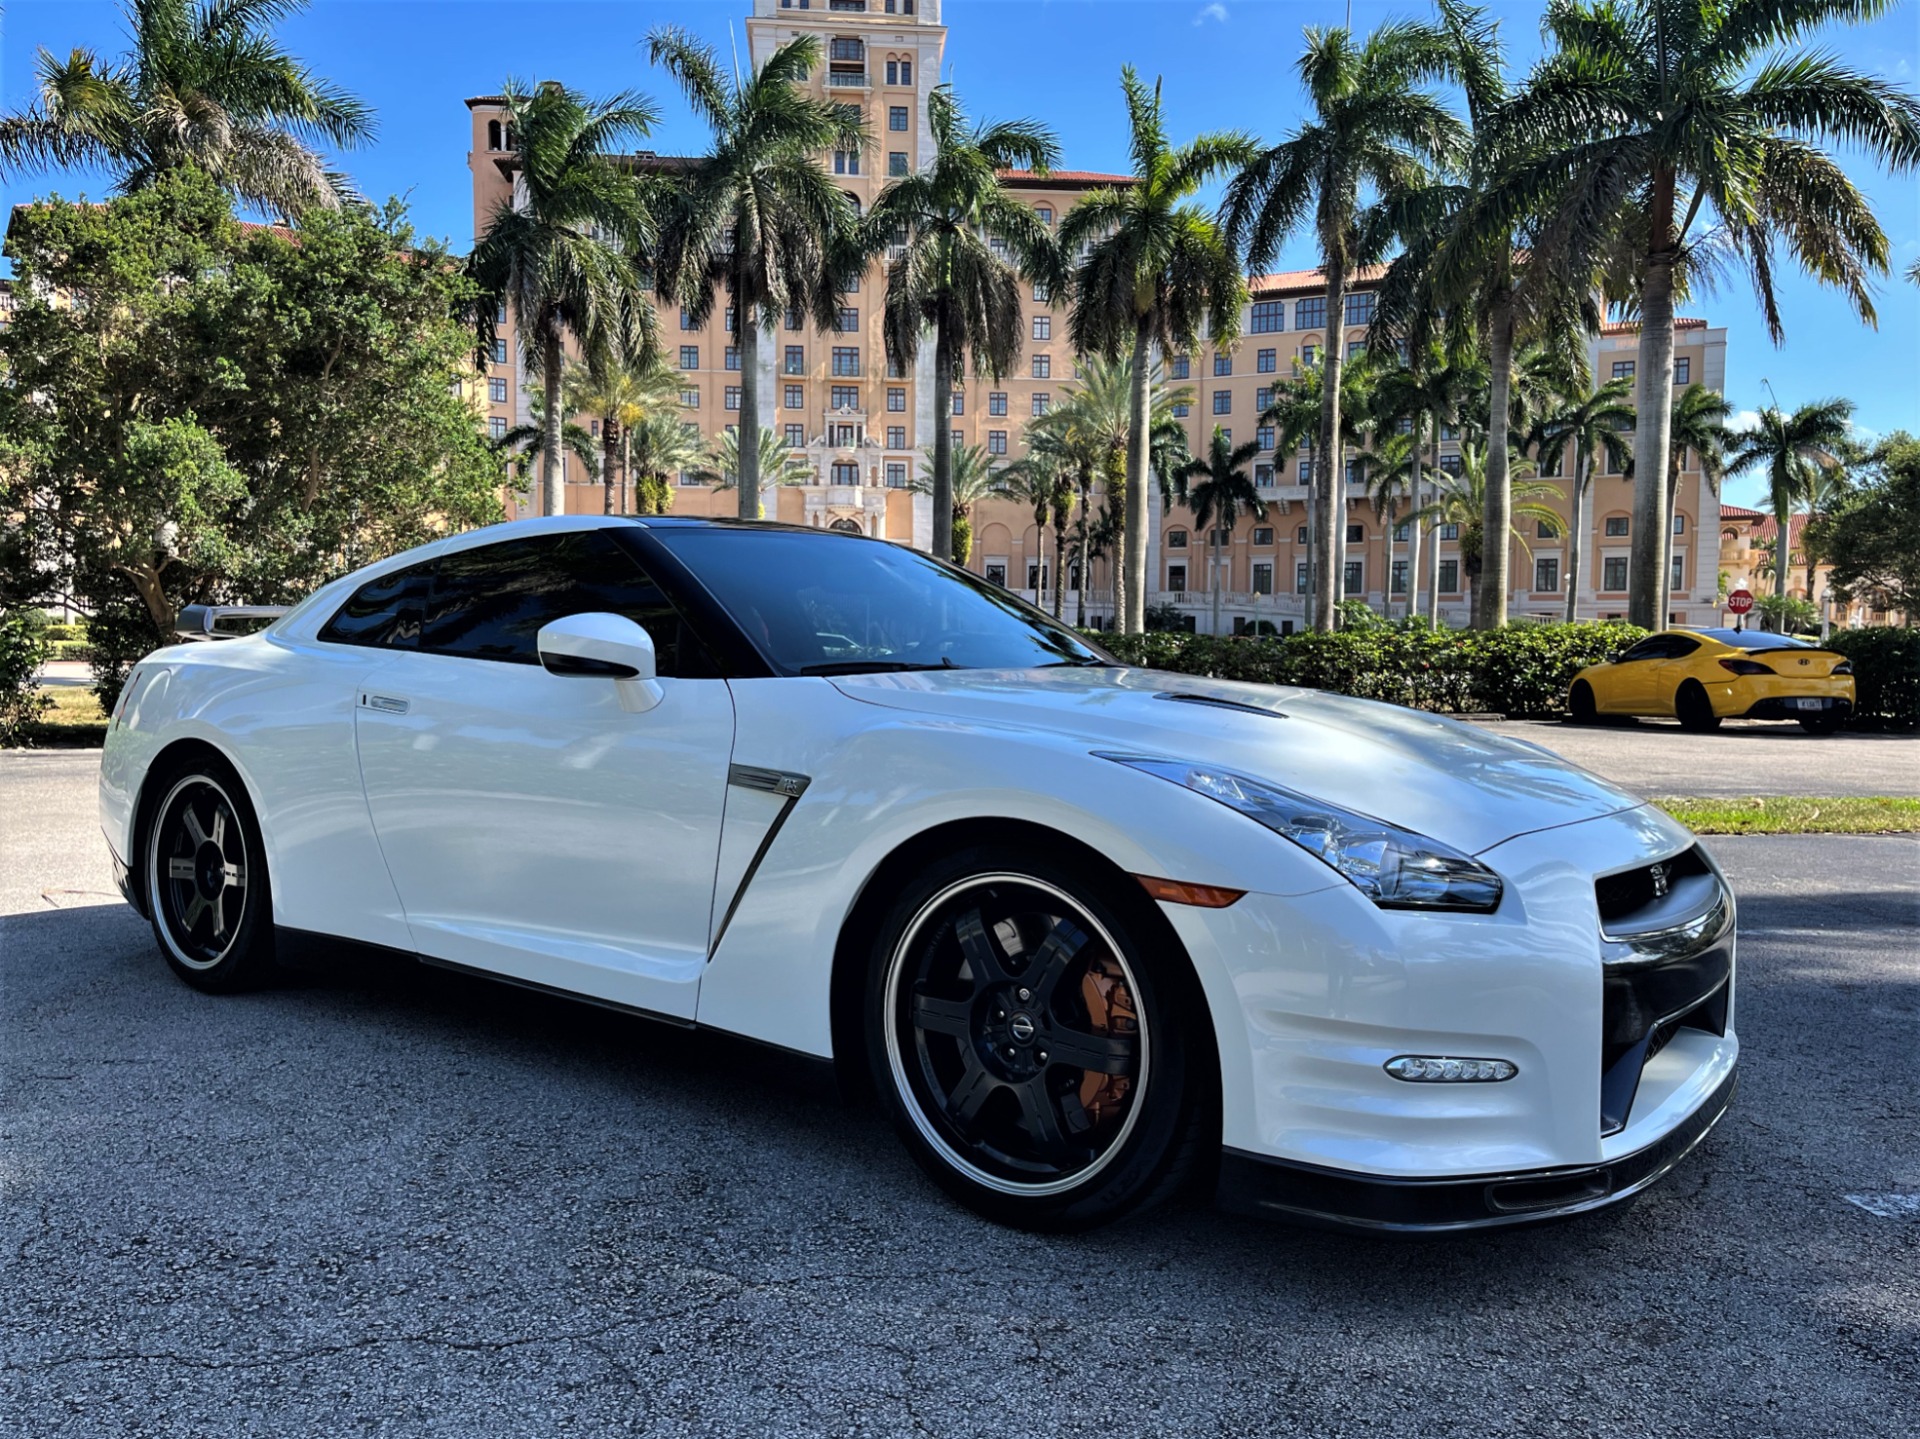 Used 2014 Nissan GT-R Track Edition for sale Sold at The Gables Sports Cars in Miami FL 33146 2